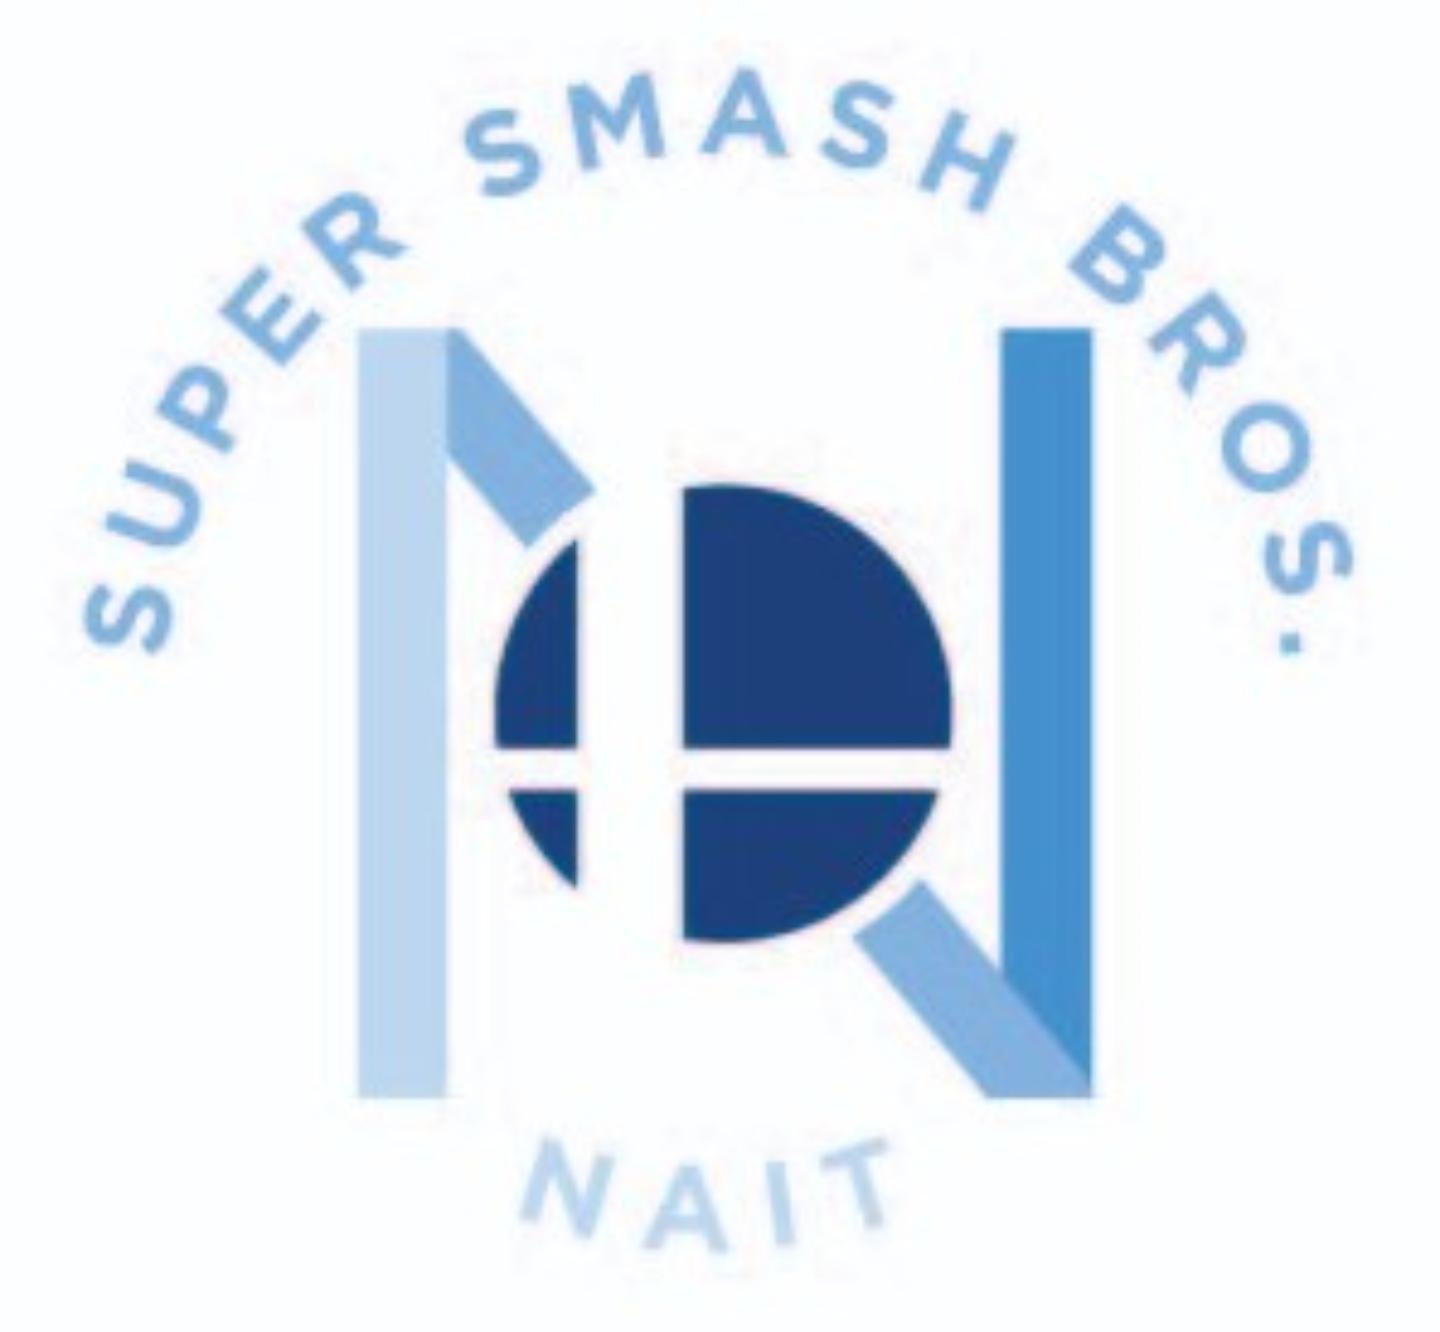 We are the official Twitter for Smash @ NAIT!

Follow for:
- Announcements
- Results
- News
- Updates